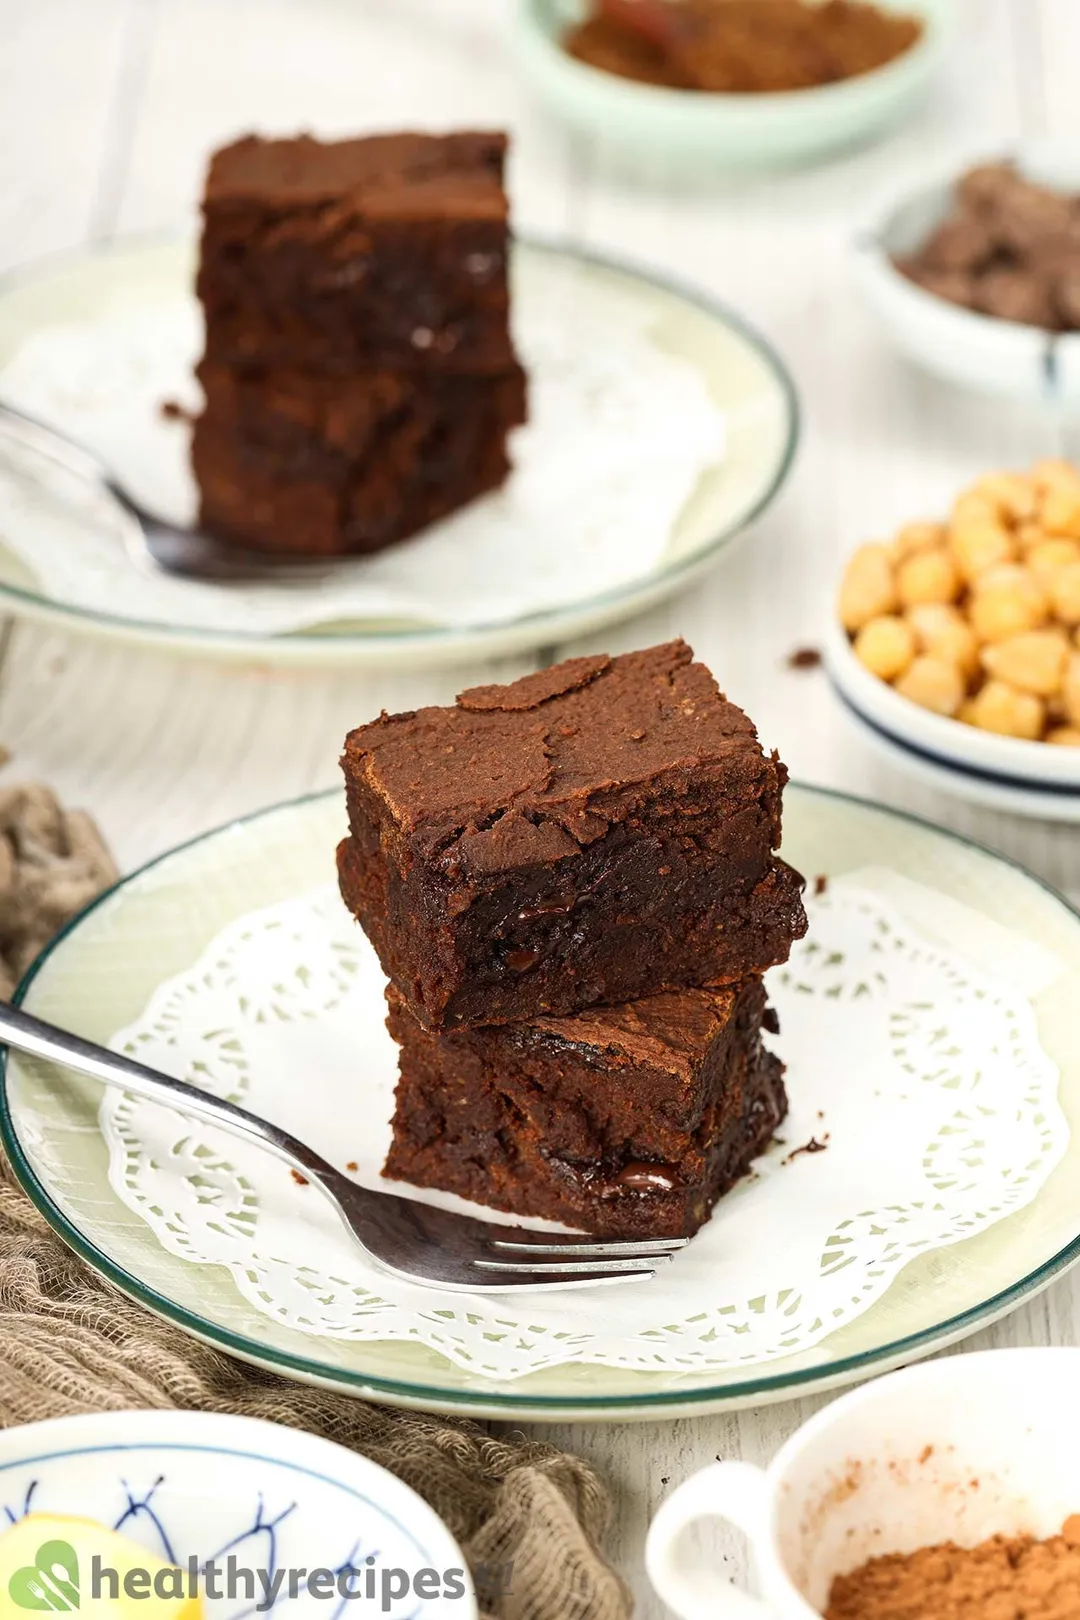 Two chickpea brownie squares stacked on top of each other with a fork laid on the side and a similar dish on the background.